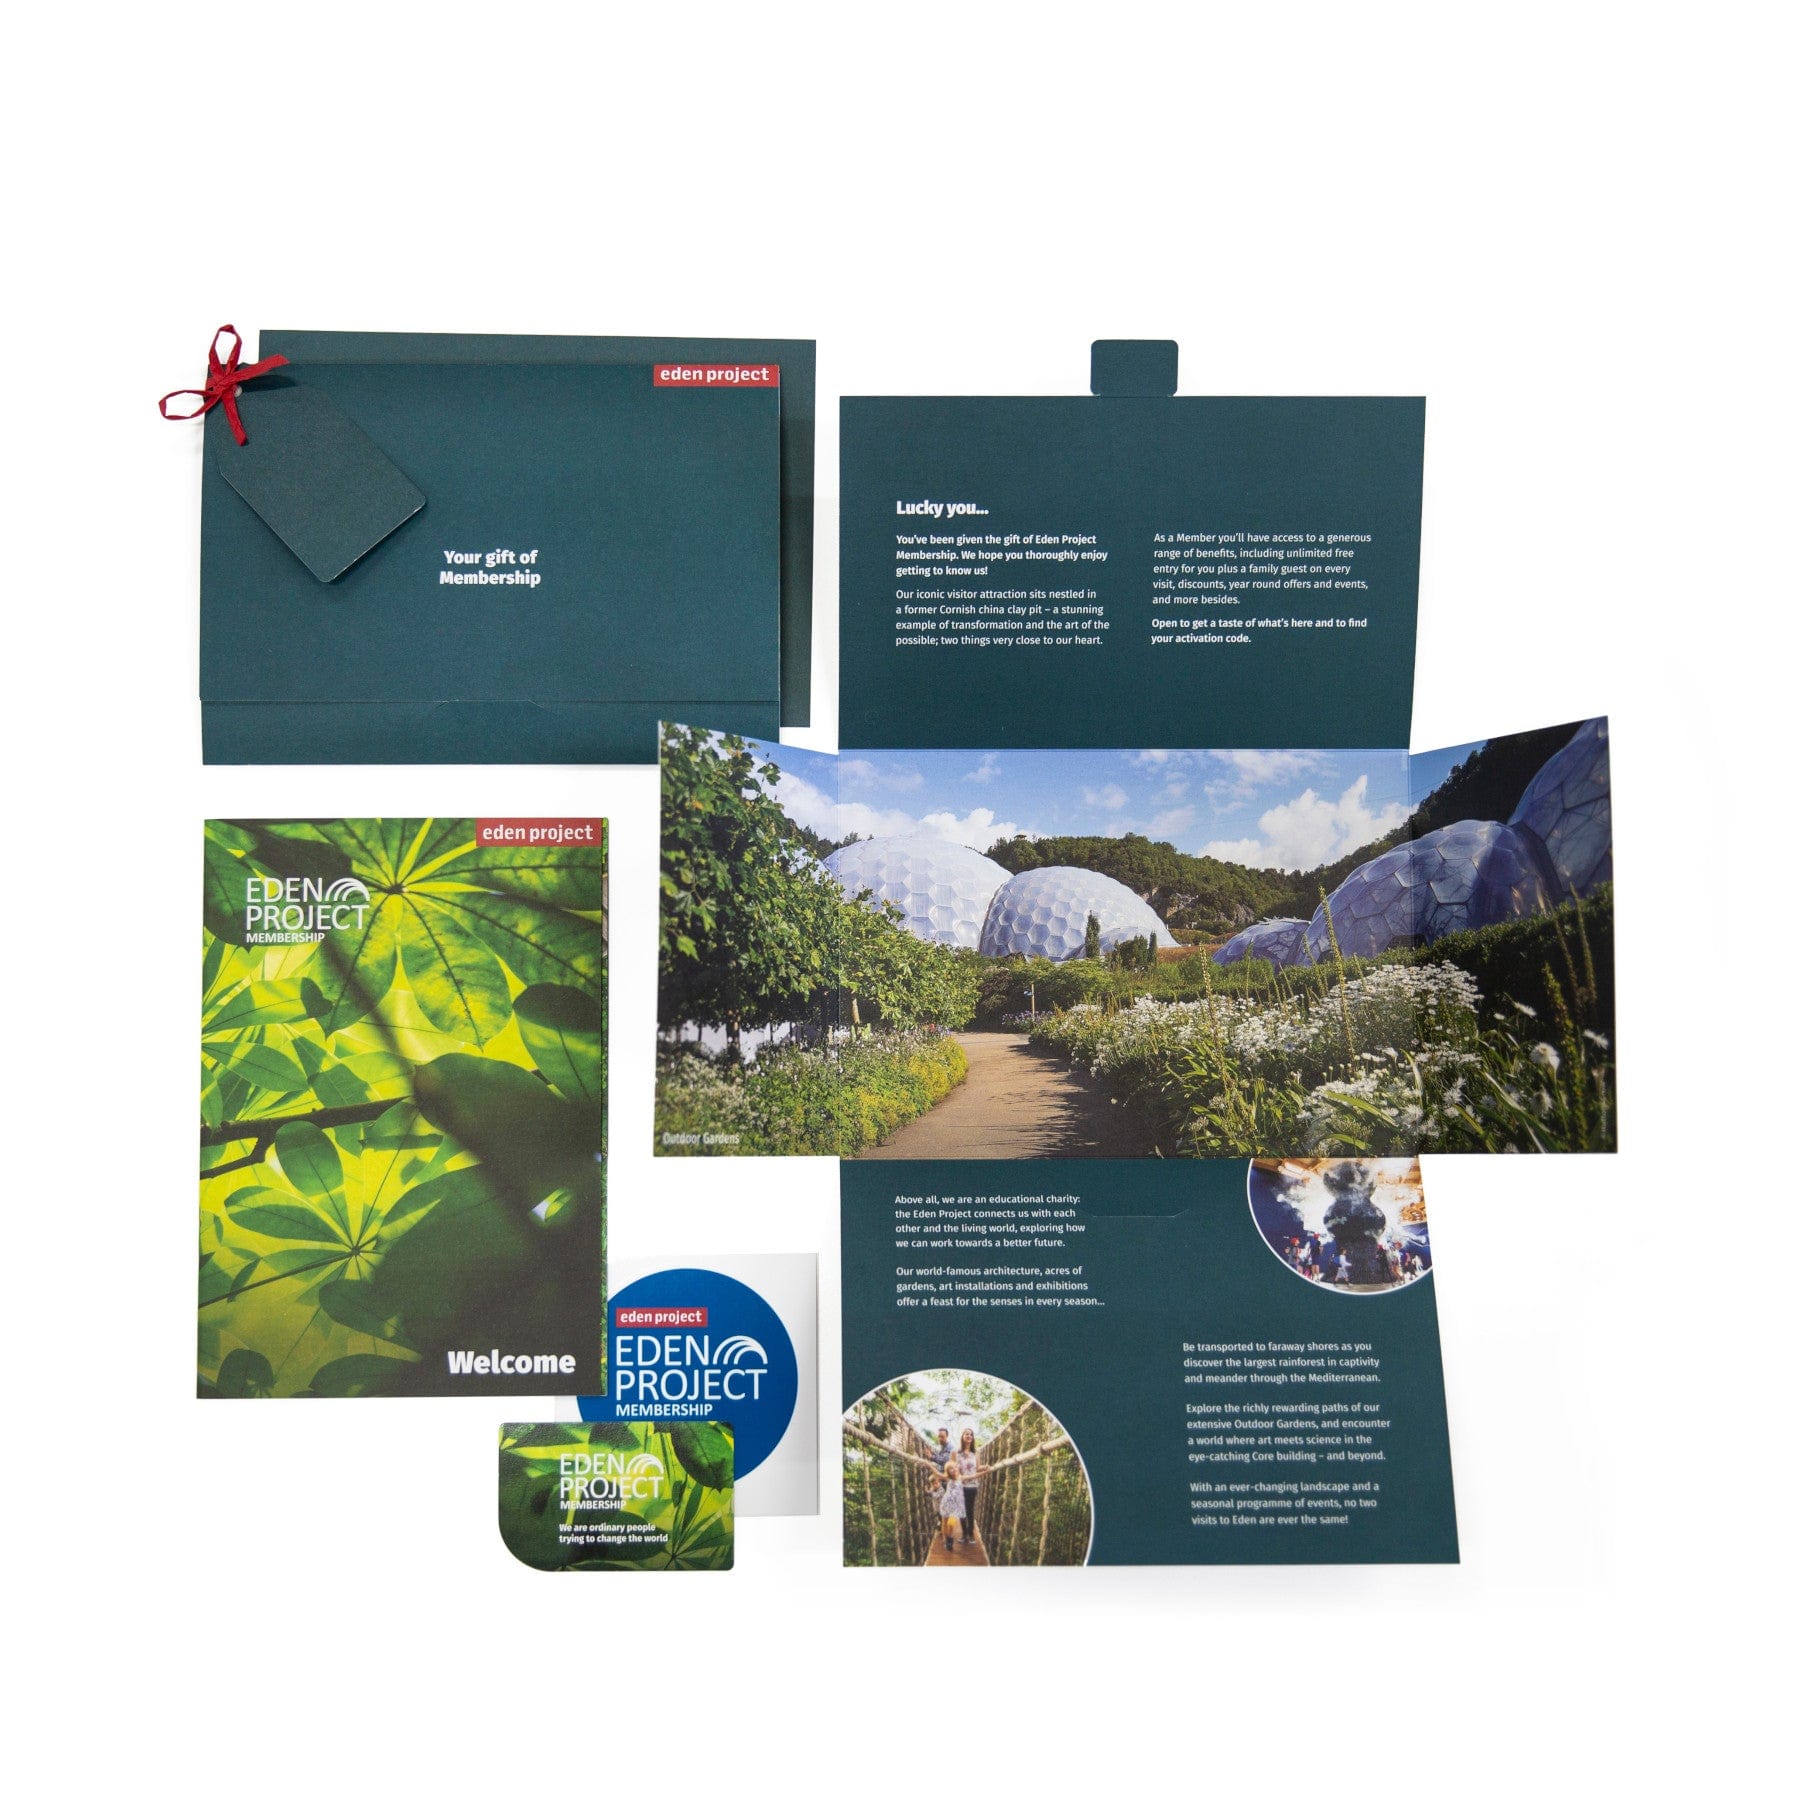 Eden Project membership pack spread out with welcome booklet, gift of membership card, informational leaflets, and image of iconic biomes